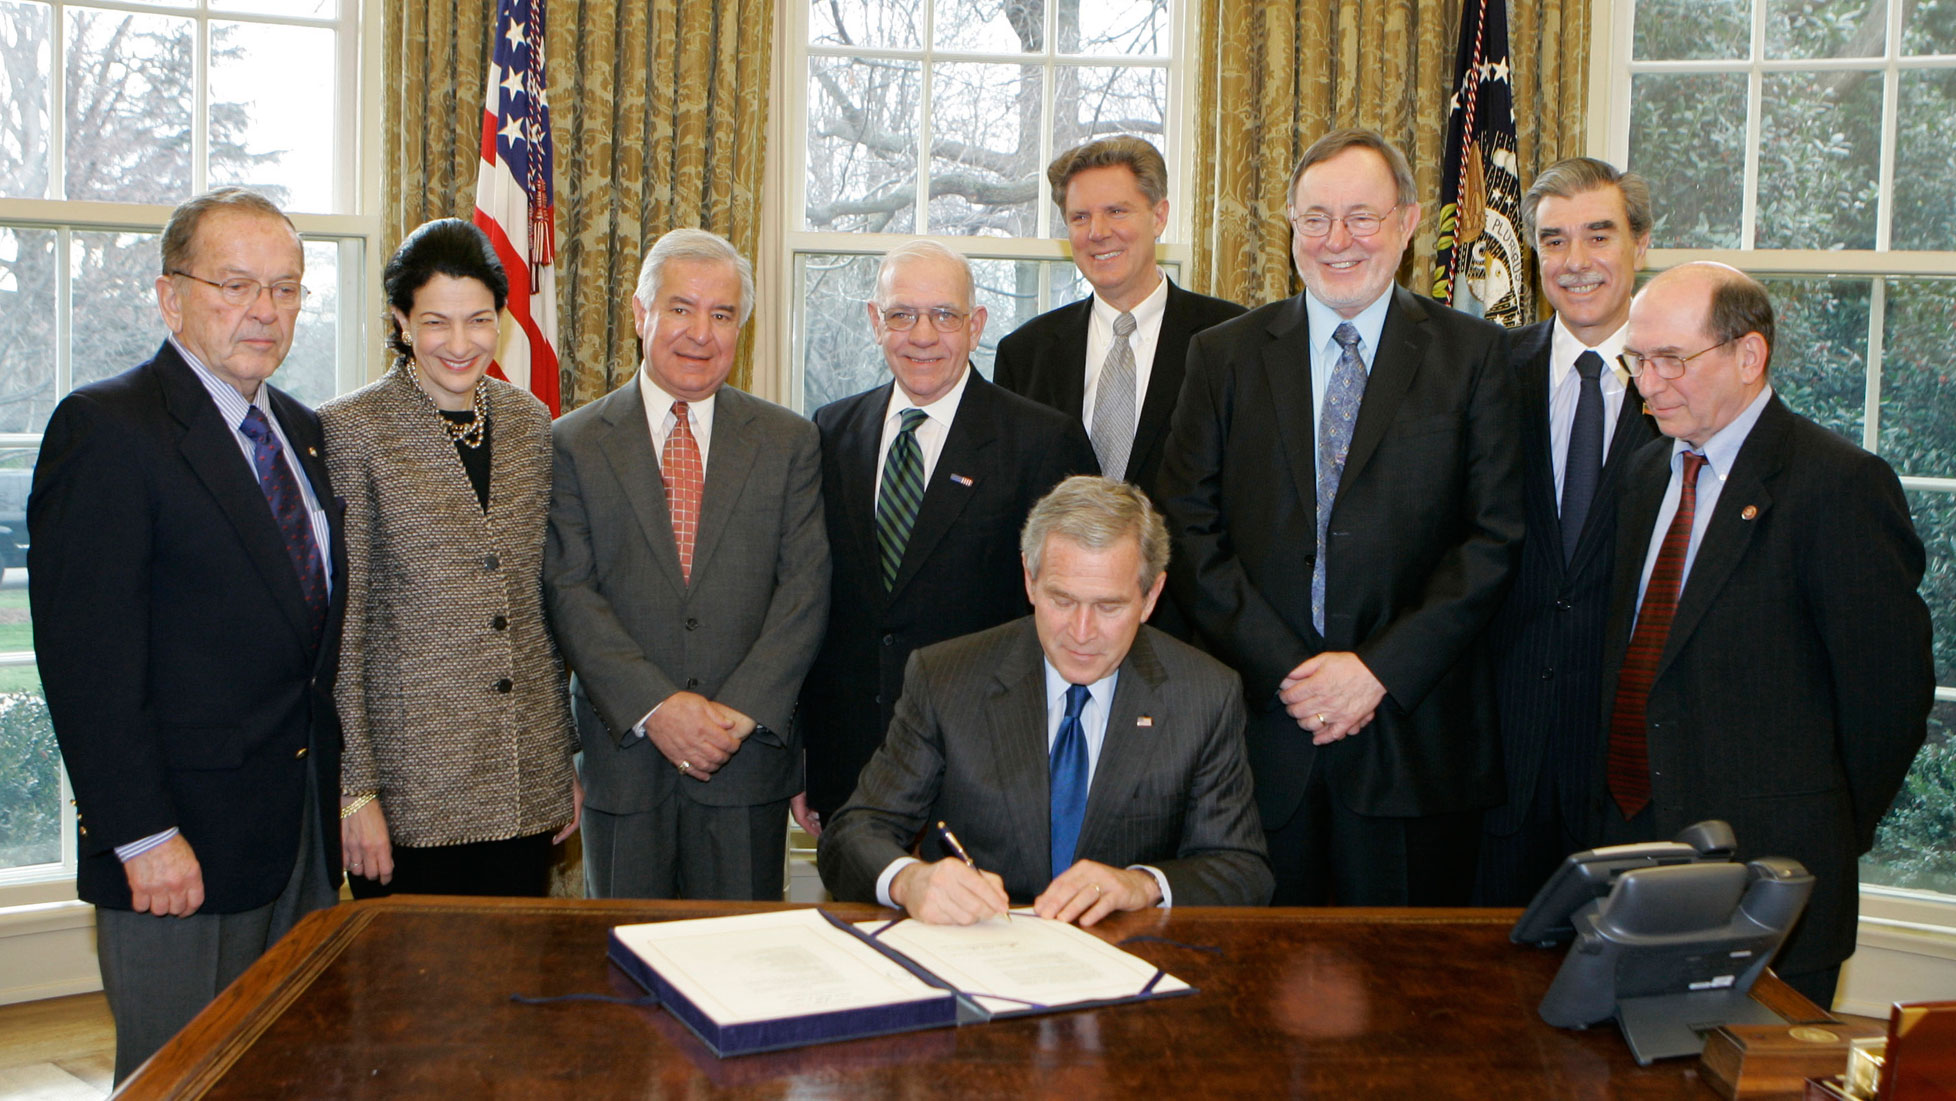 President Bush signs the Magnuson-Stevens Fishery Conservation and Management Reauthorization Act of 2006. Behind him are lawmakers from both parties. 